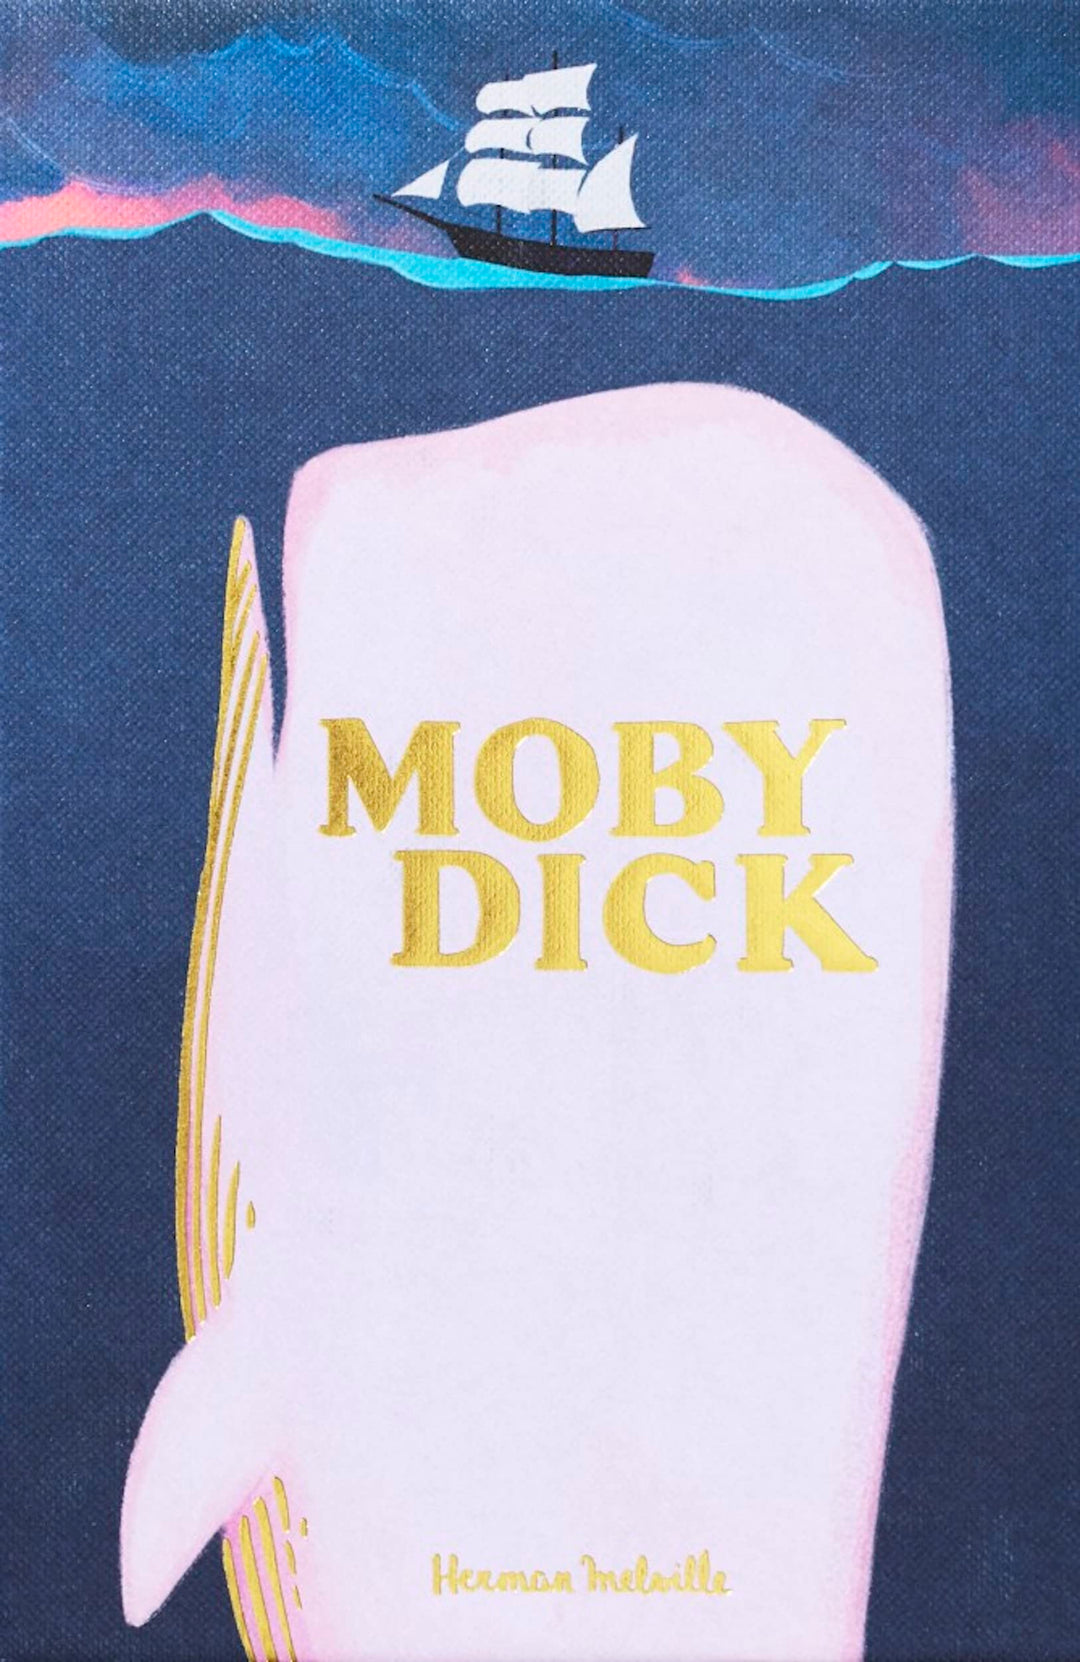 Moby Dick (Wordsworth Collector's Editions) by Herman Melville